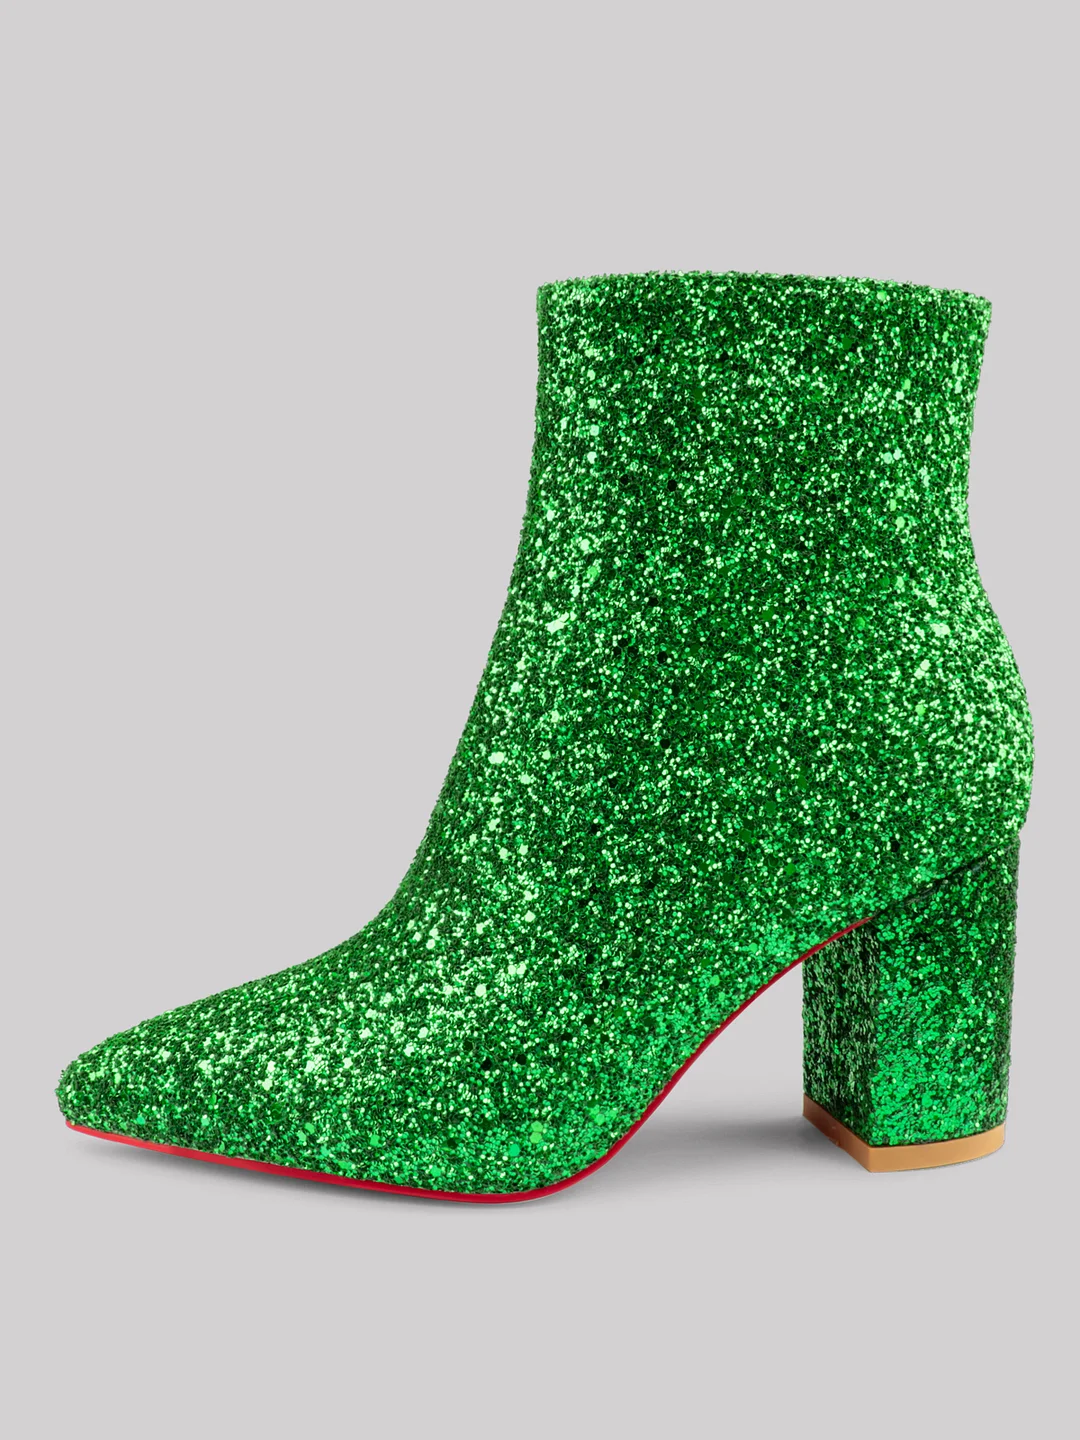 75mm Women's Ankle Booties Chunky Block Heel Pointed Toe Zipper Shiny Glitter Red Bottom Boots